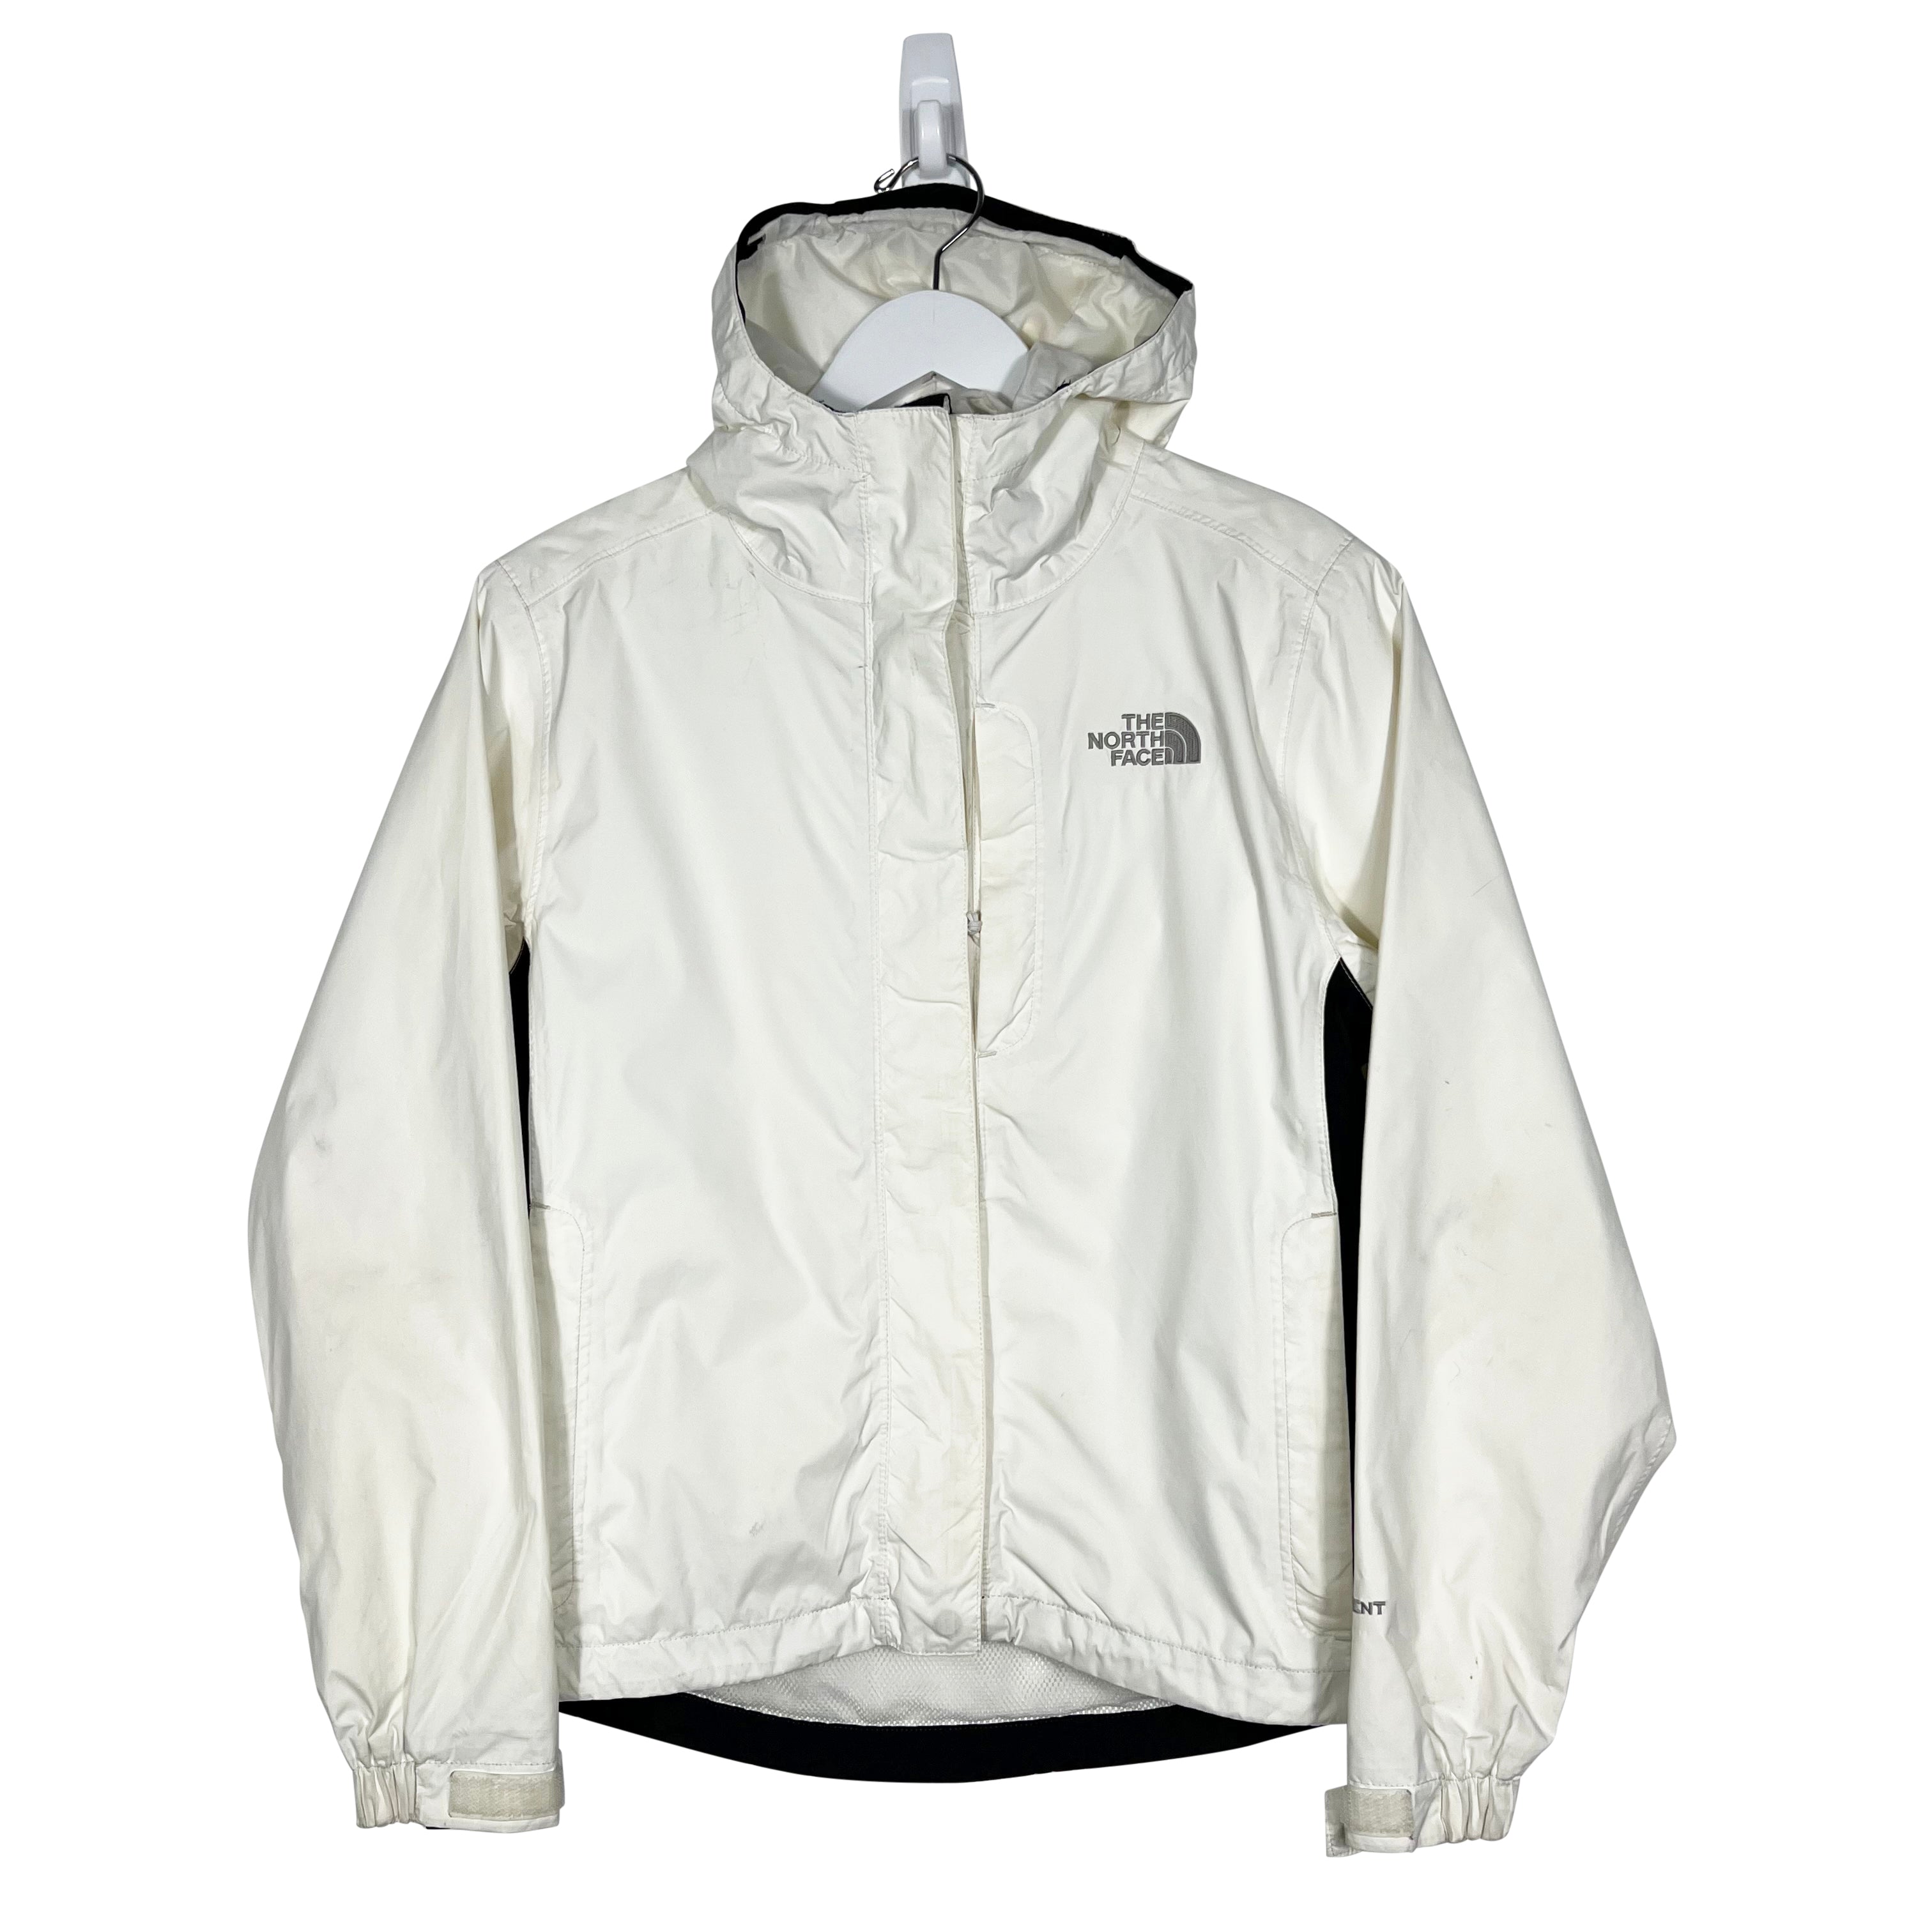 The North Face Lightweight Jacket - Women's XS